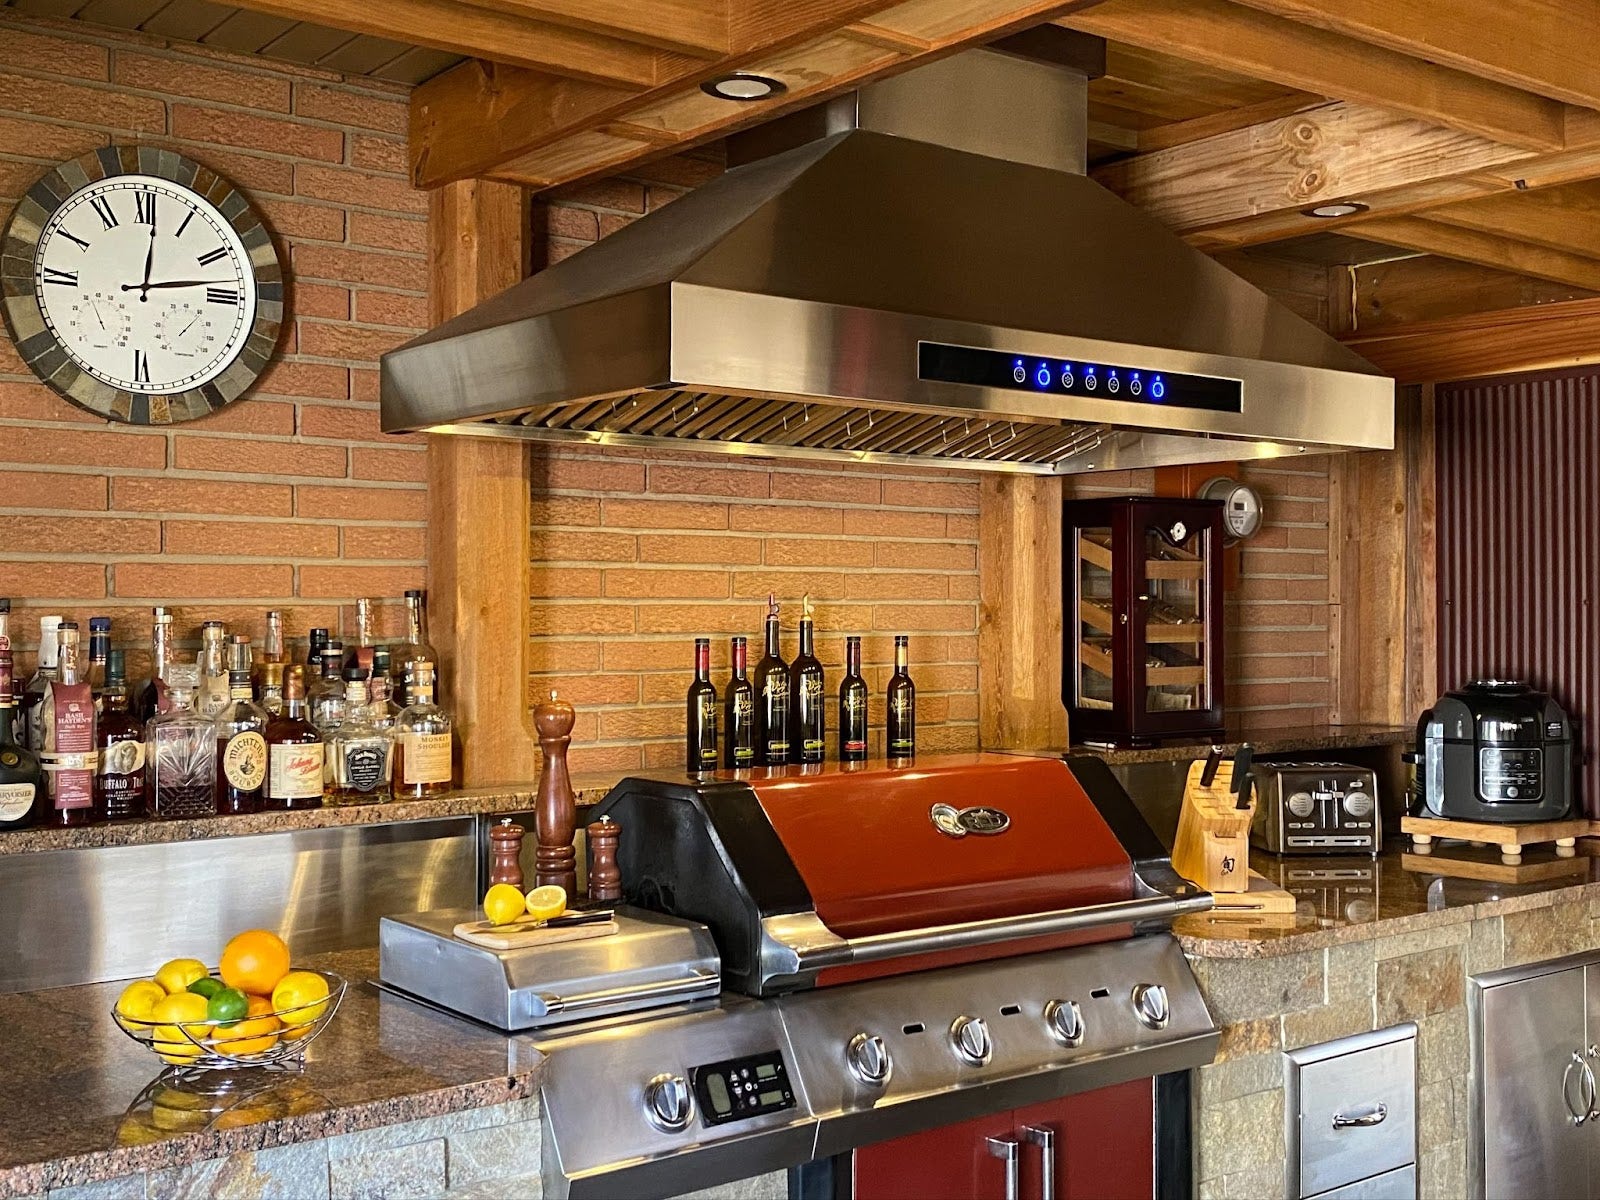 Home kitchen bar setup with a prominent stainless steel range hood above a red grill, complemented by a diverse alcohol selection.